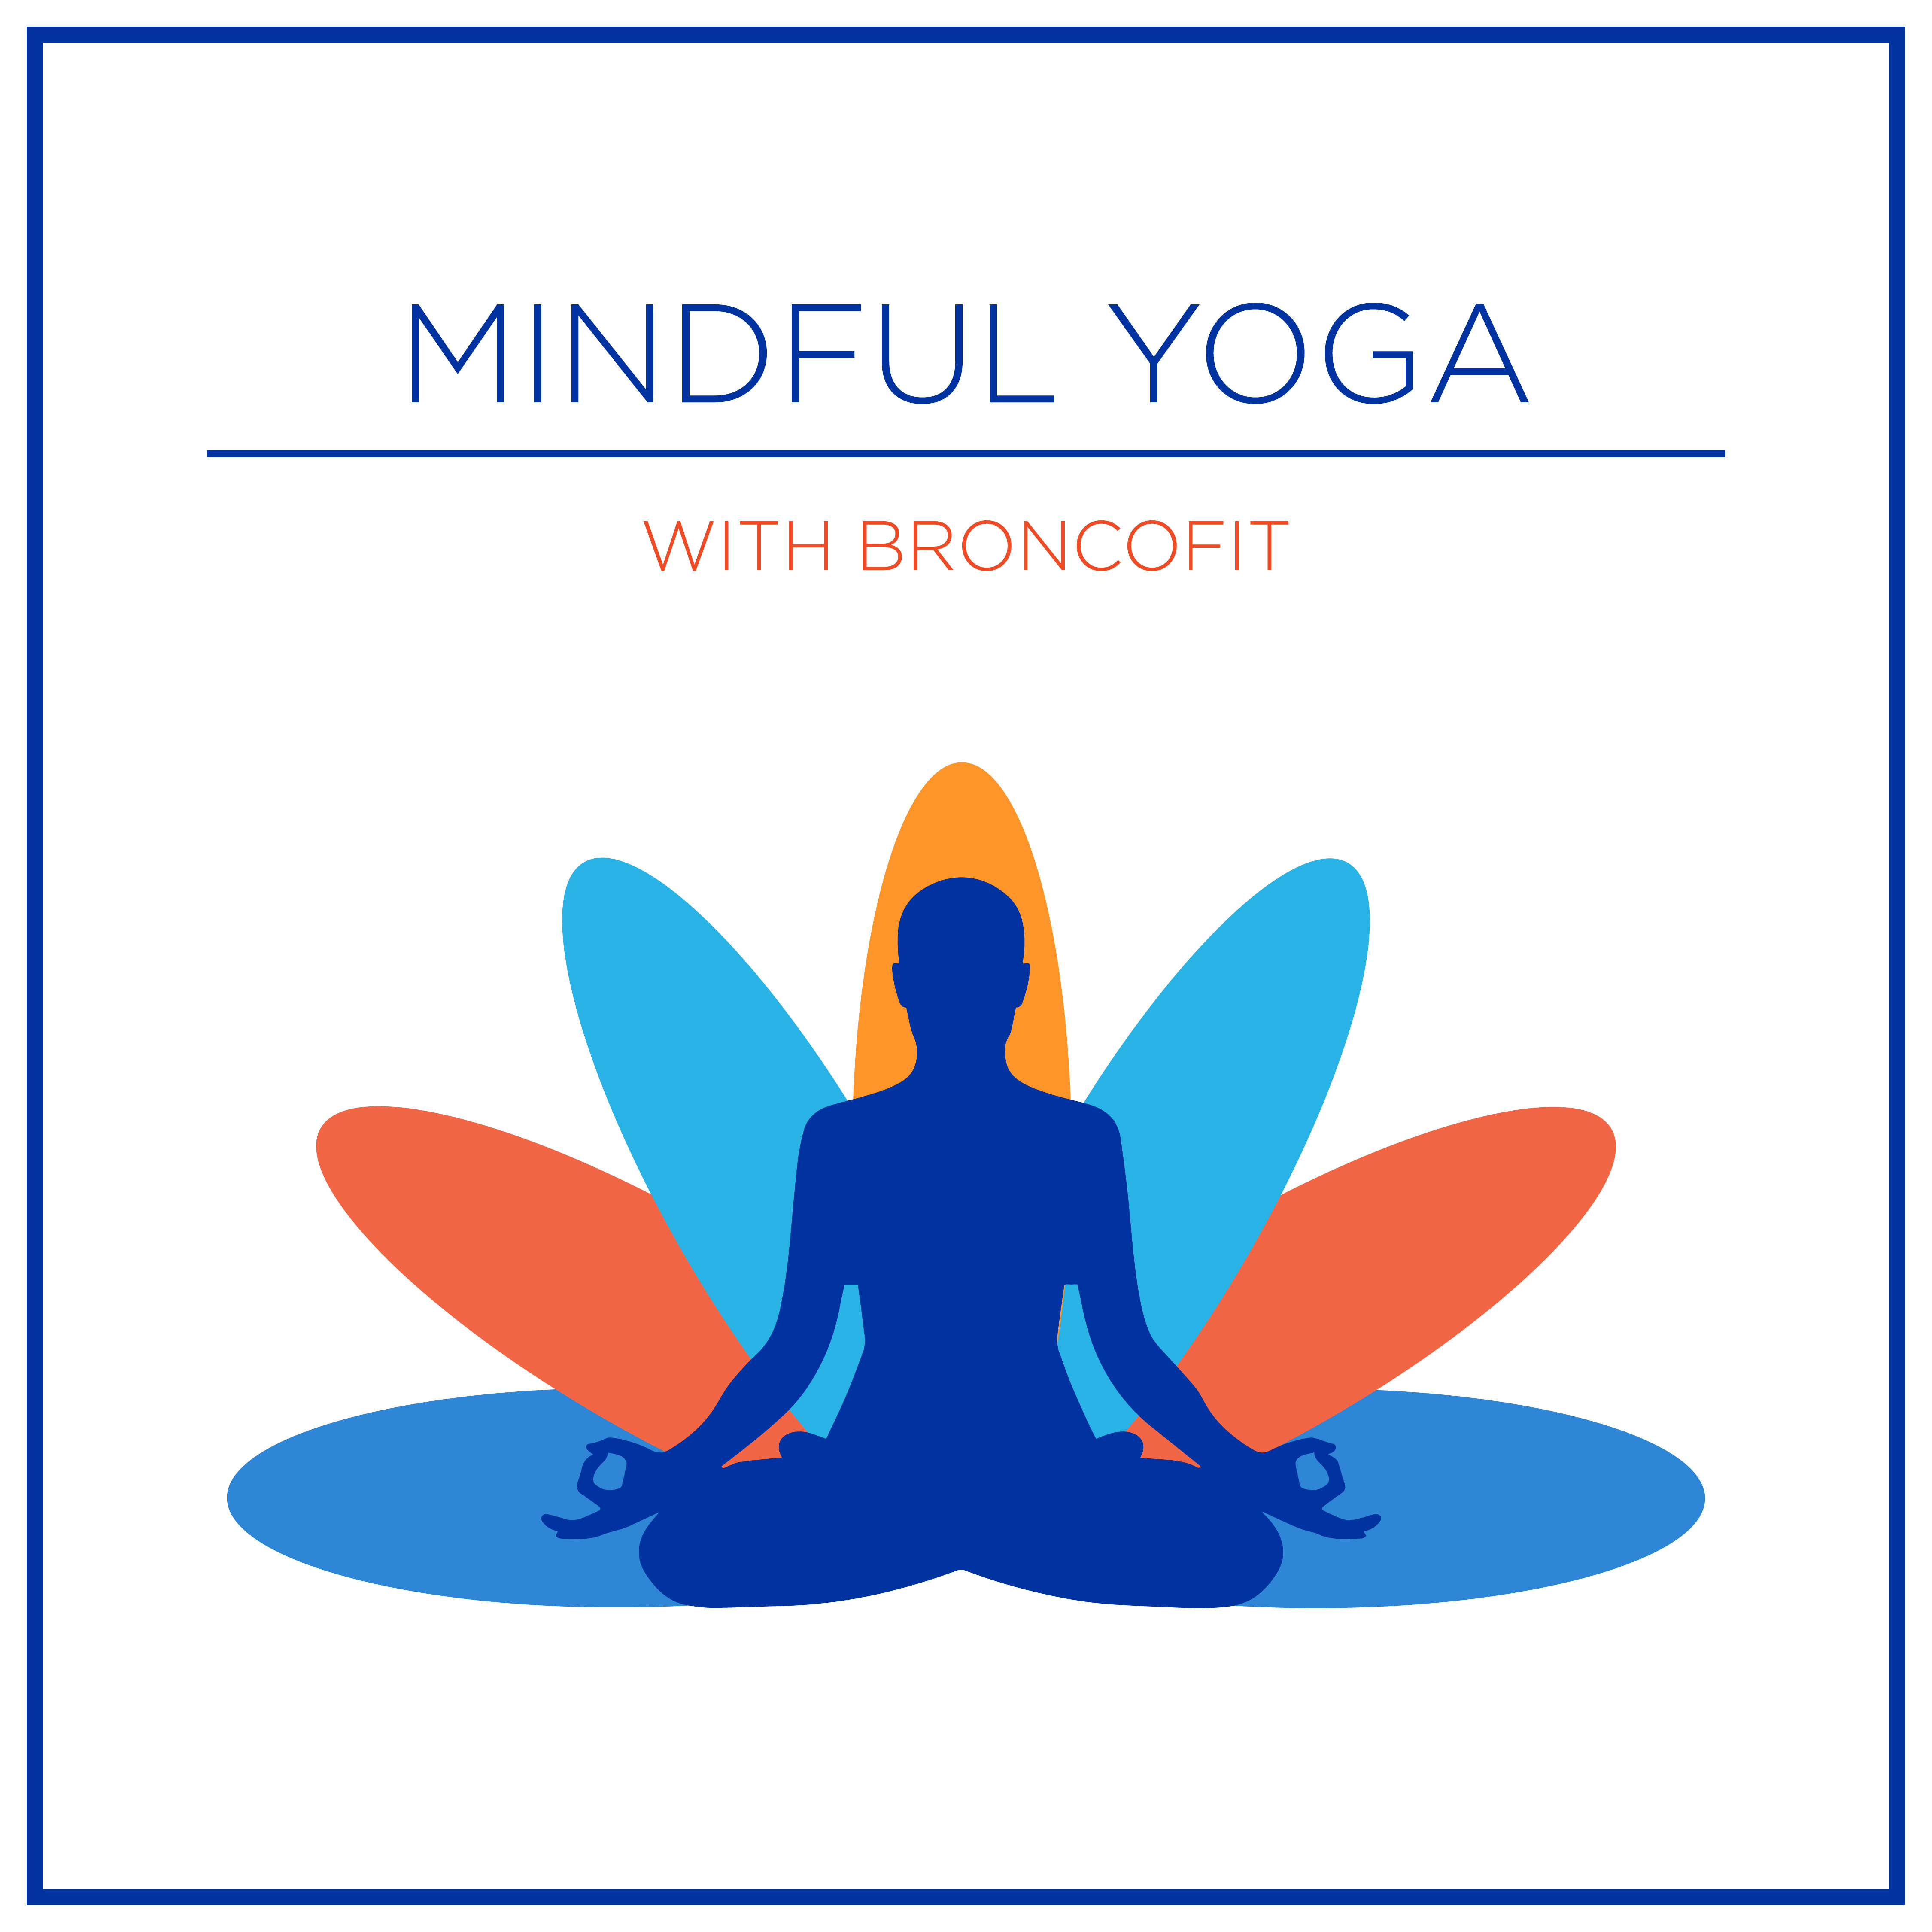 Join BroncoFit for Mindful Yoga